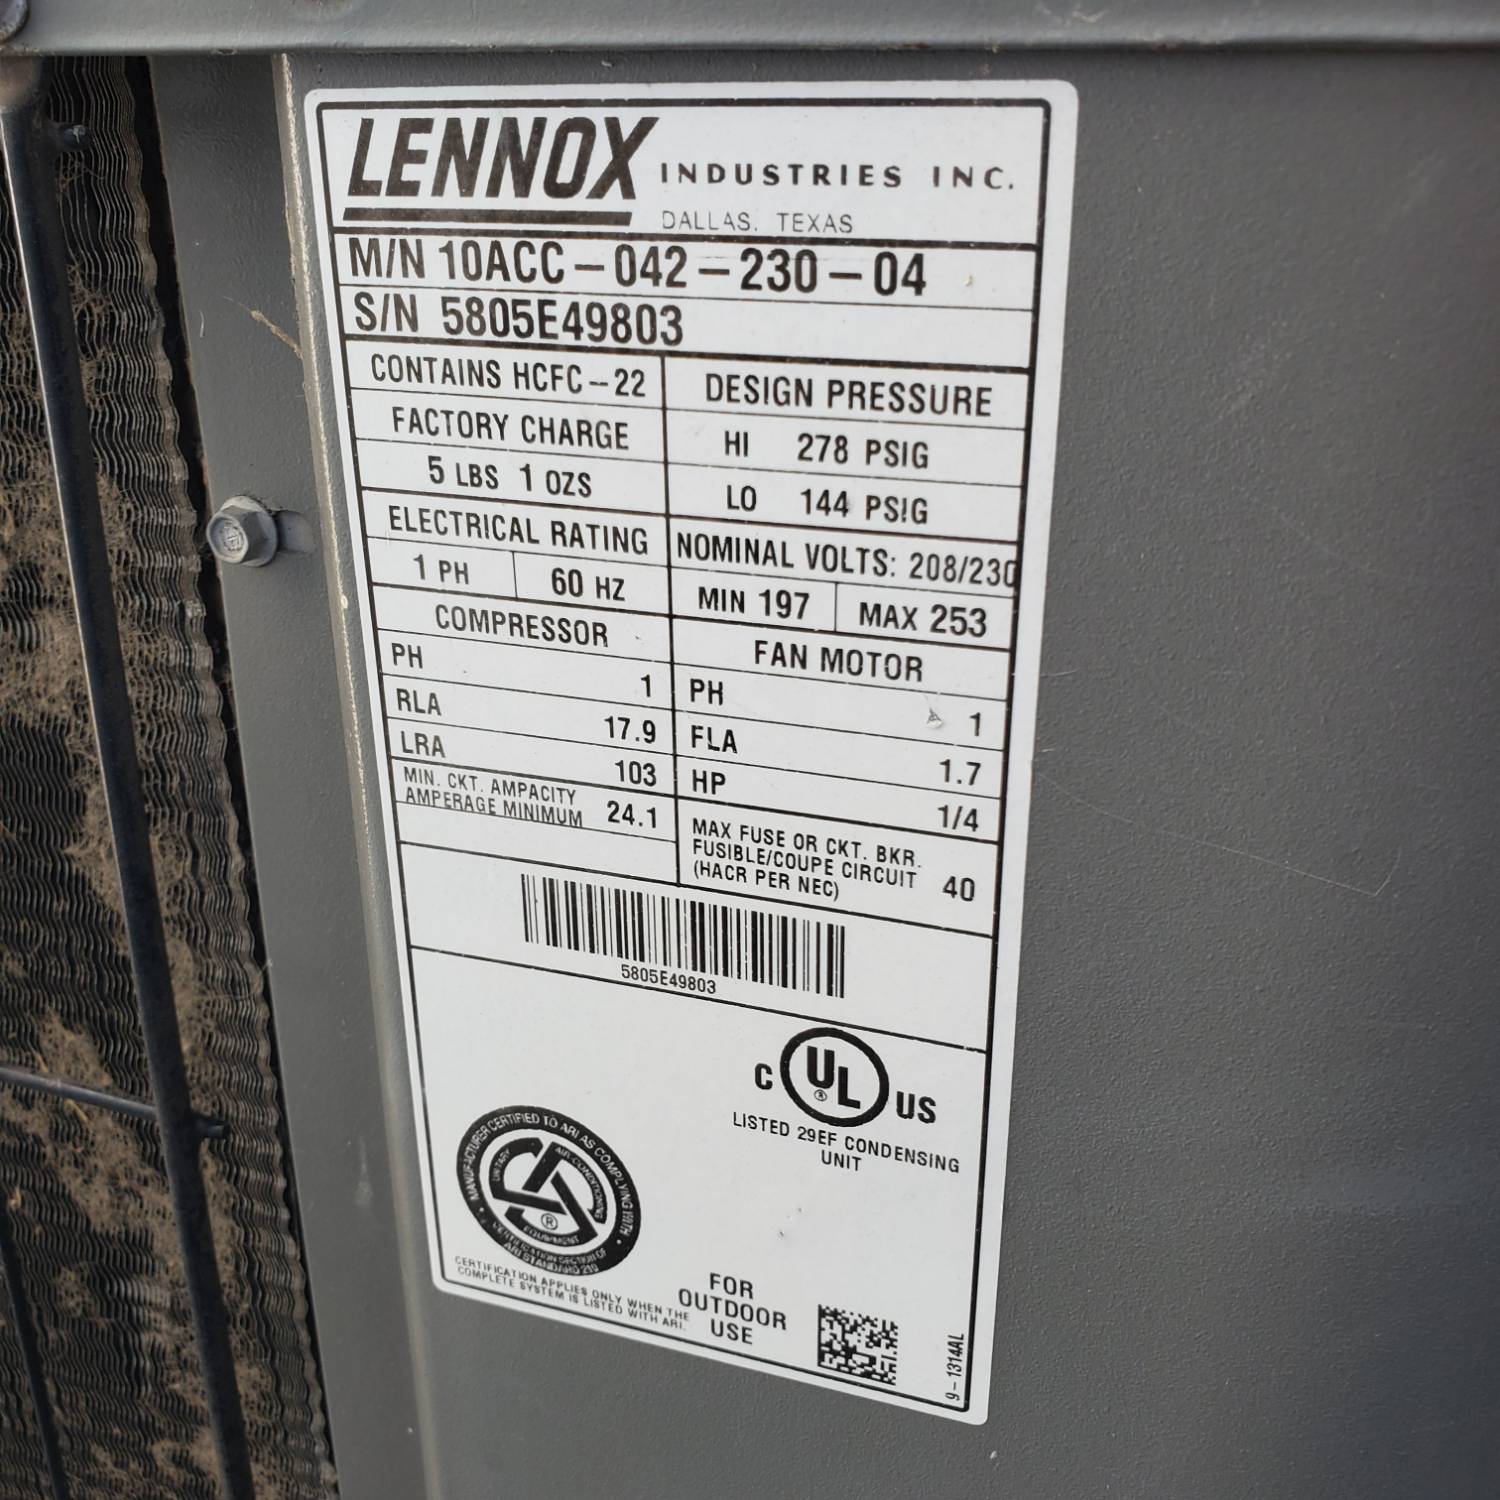 age of water heater look up serial number